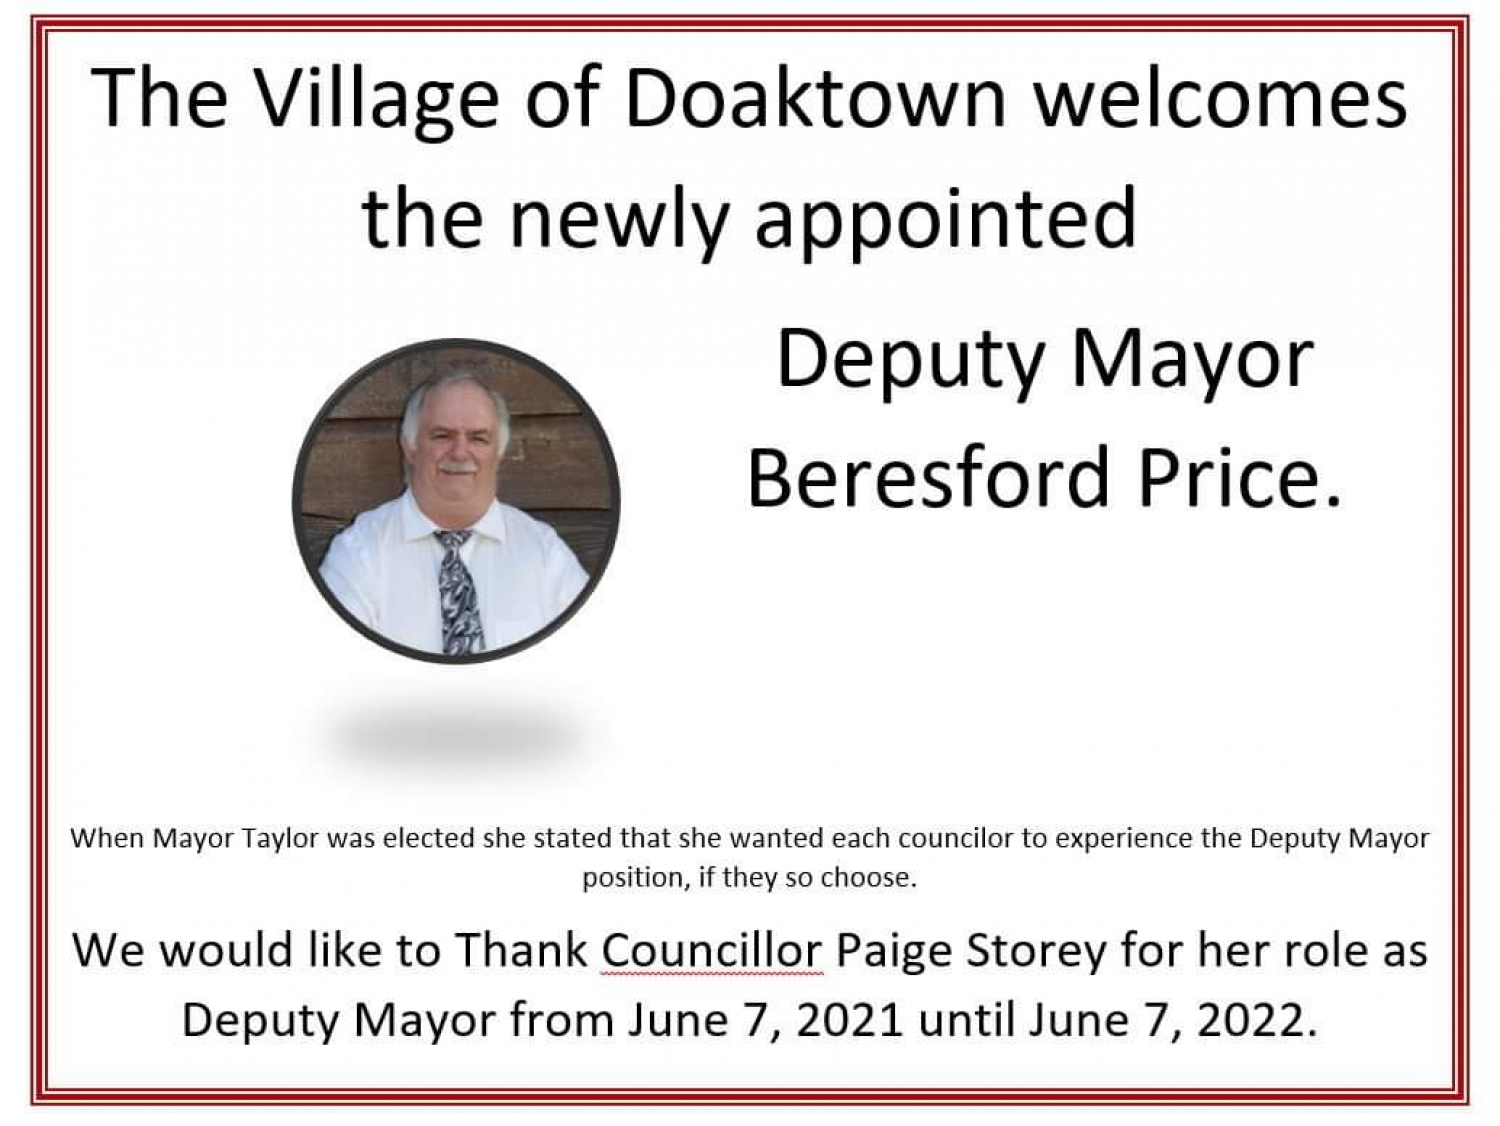 Newly Appointed Deputy Mayor Beresford Price